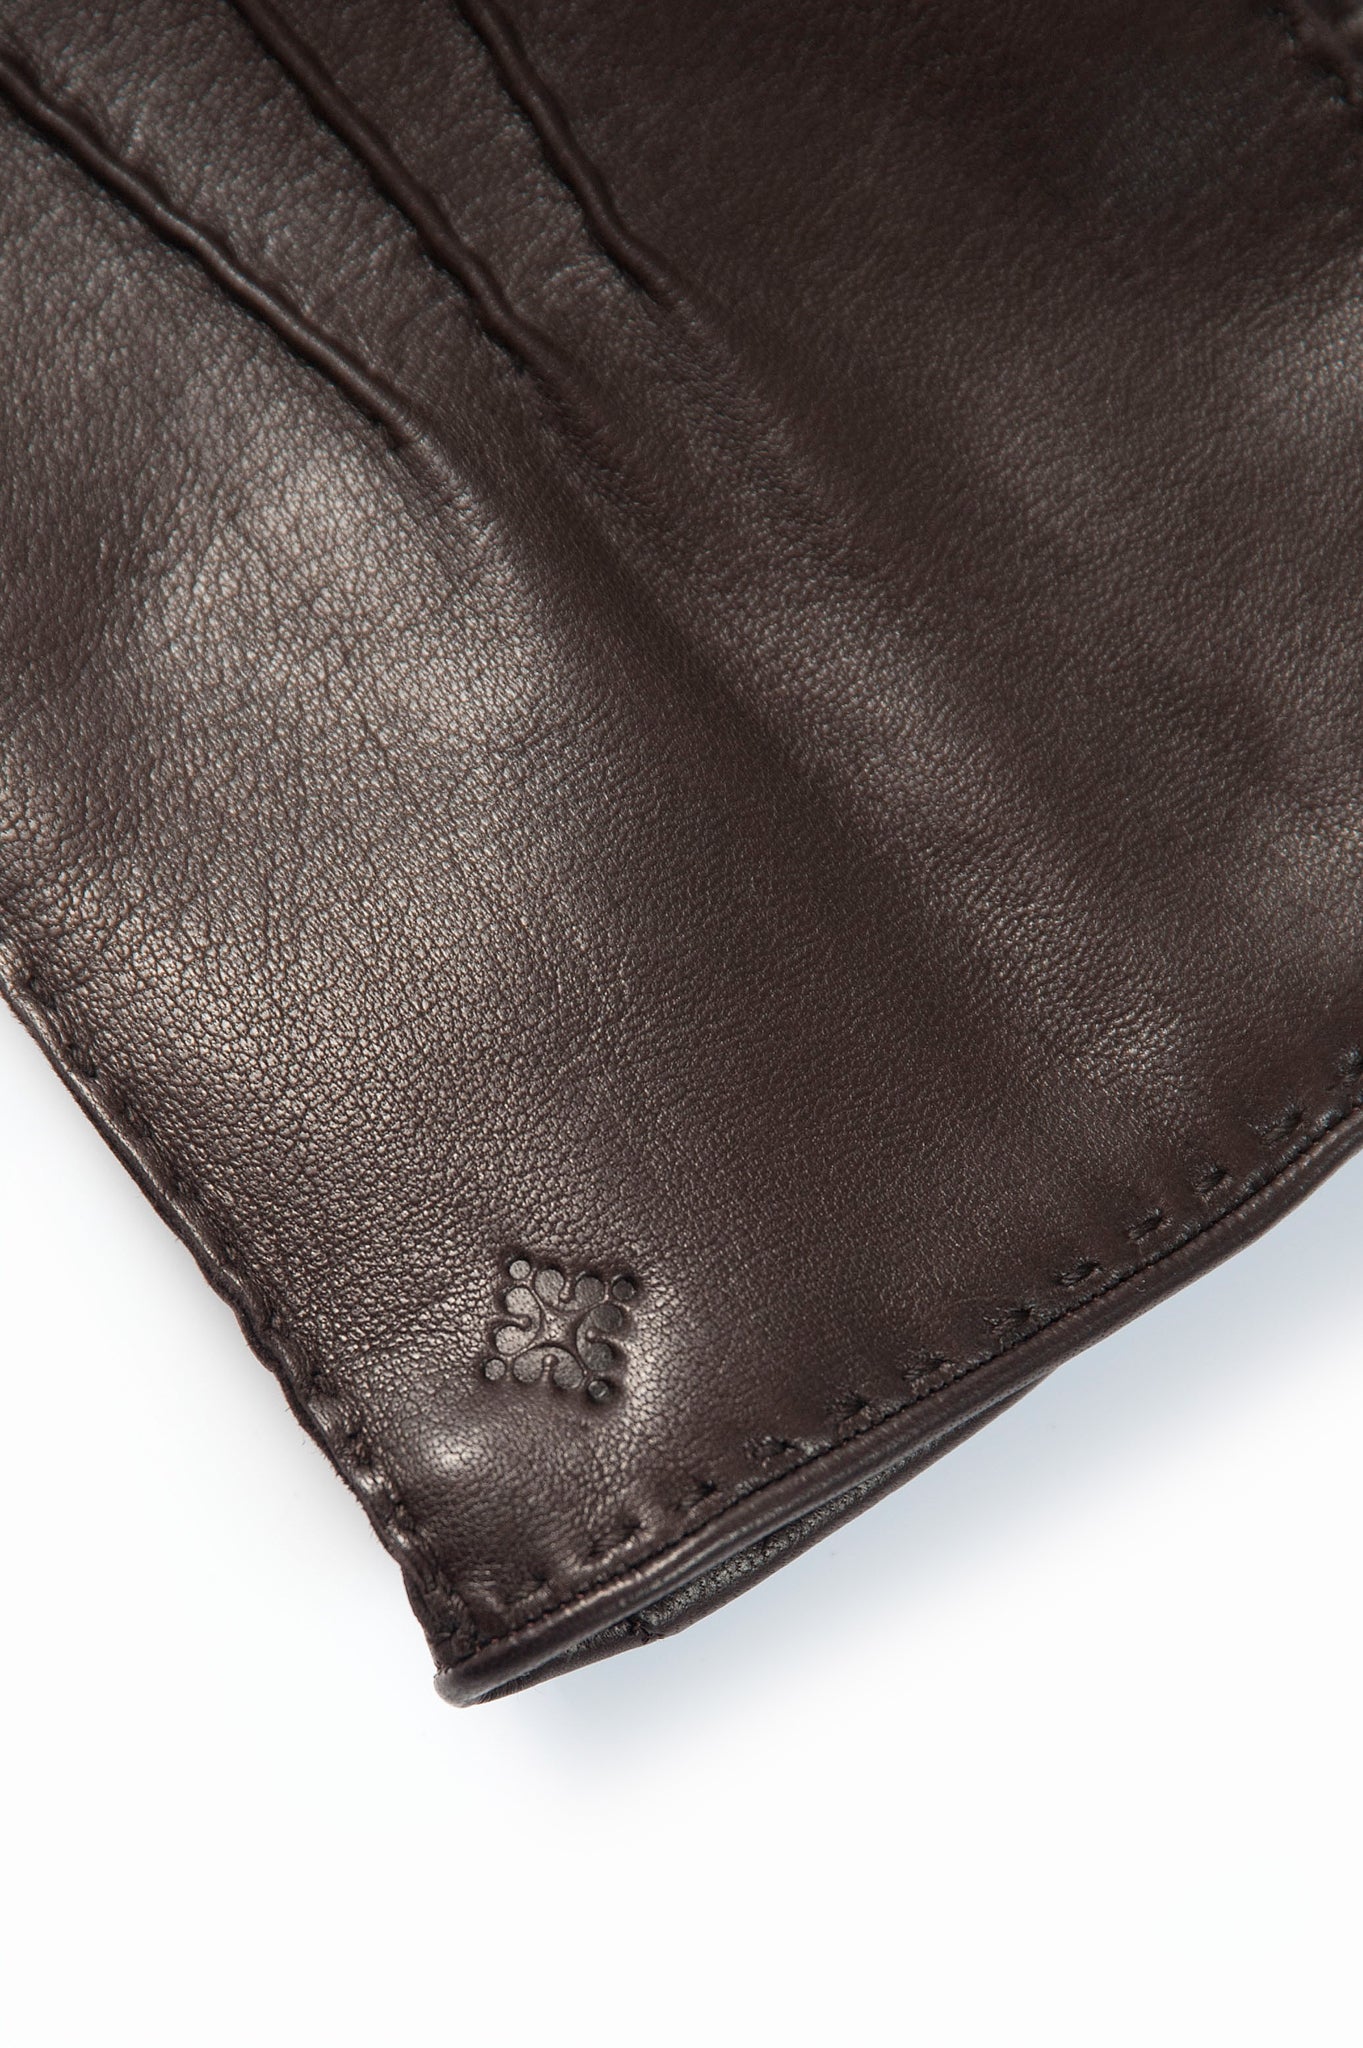 Paul 100% Soft Nappa Leather and Interior in Cashmere Gloves